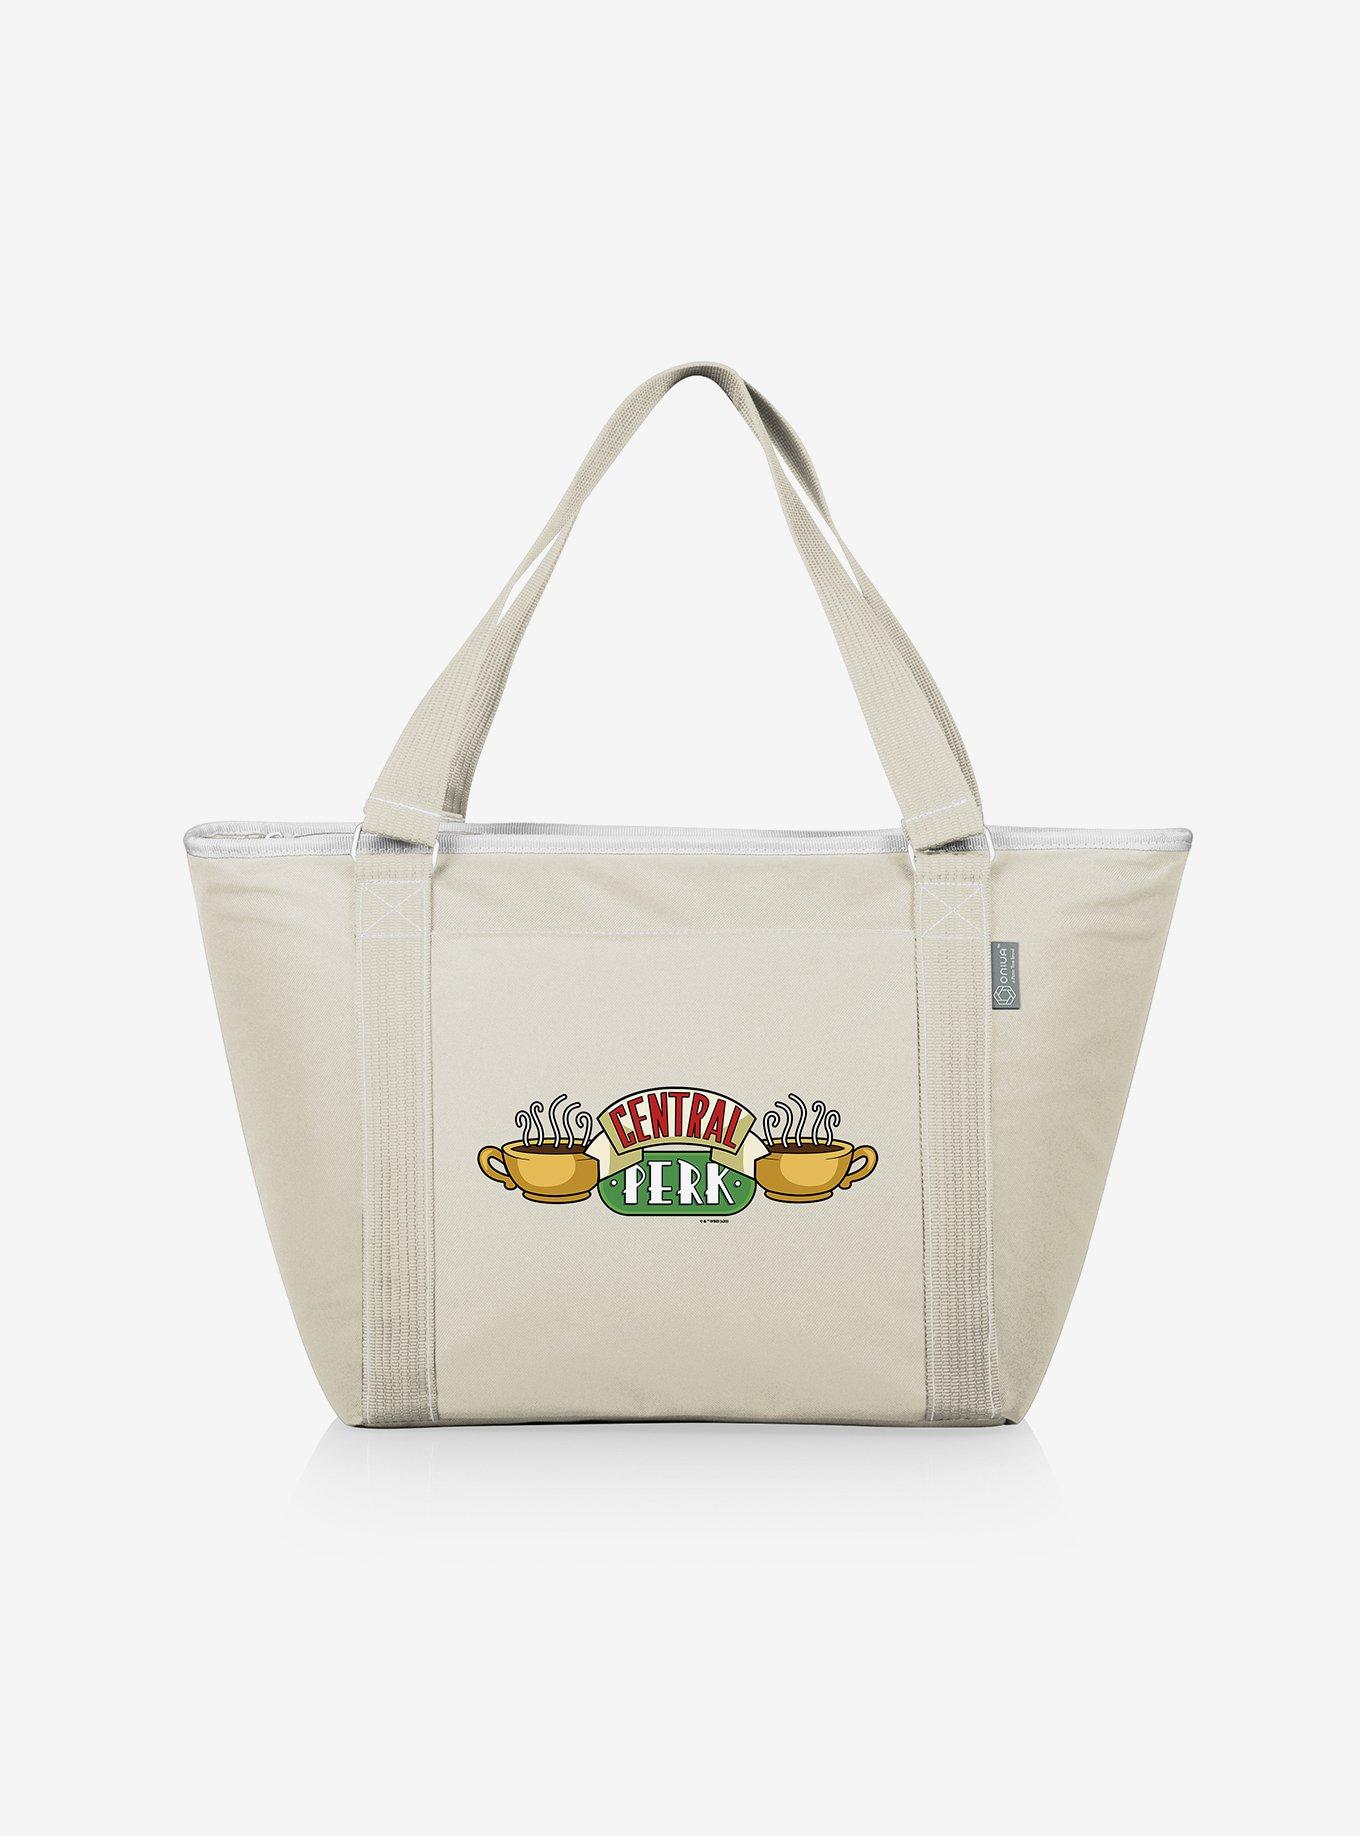 Friends Central Perk Cooler Tote Sand